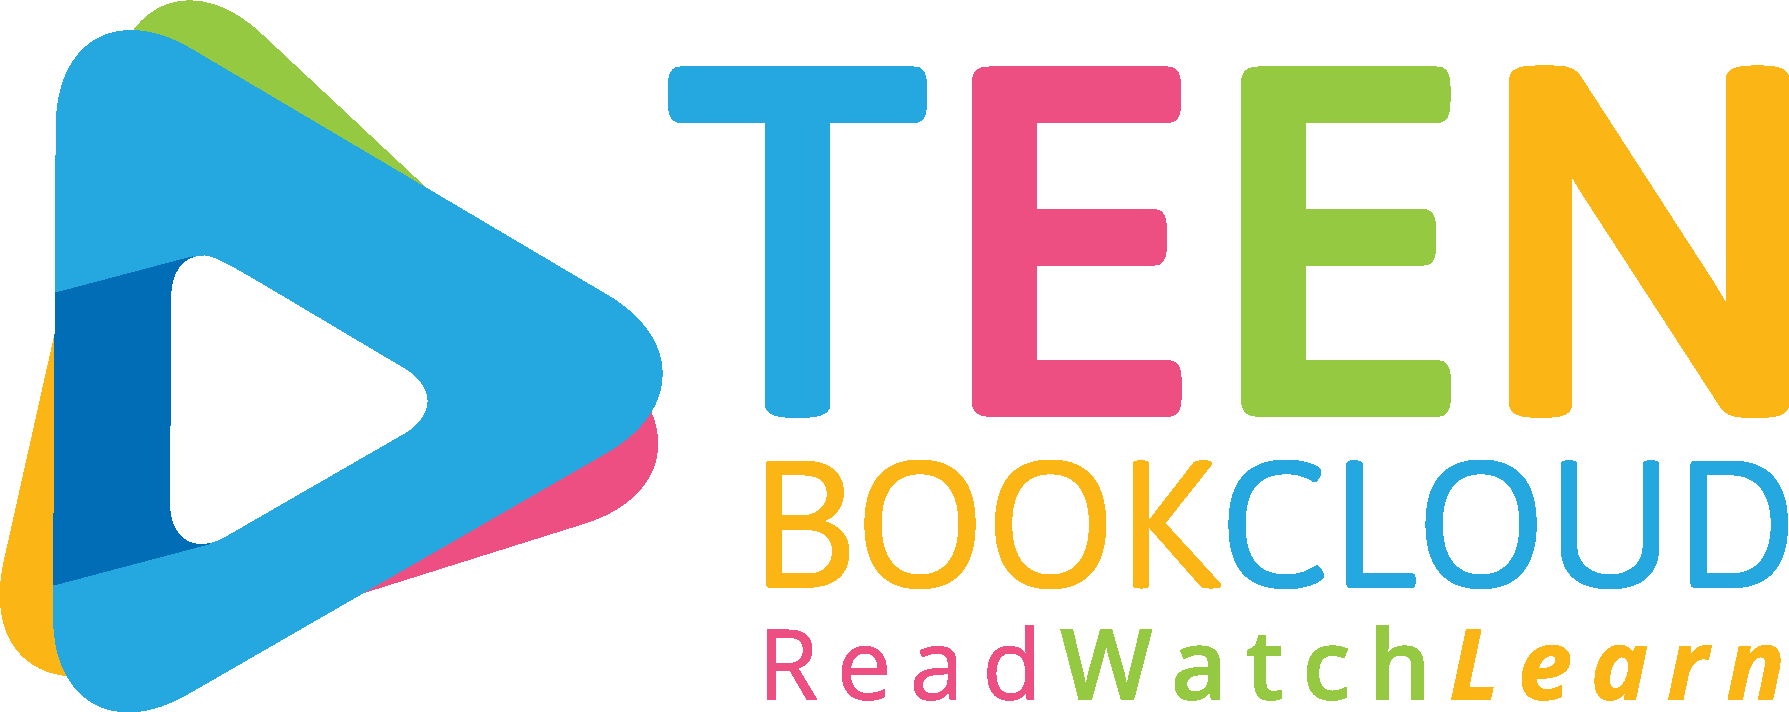 Teen Book Cloud logo, read, watch, learn with multicolor triangle. 